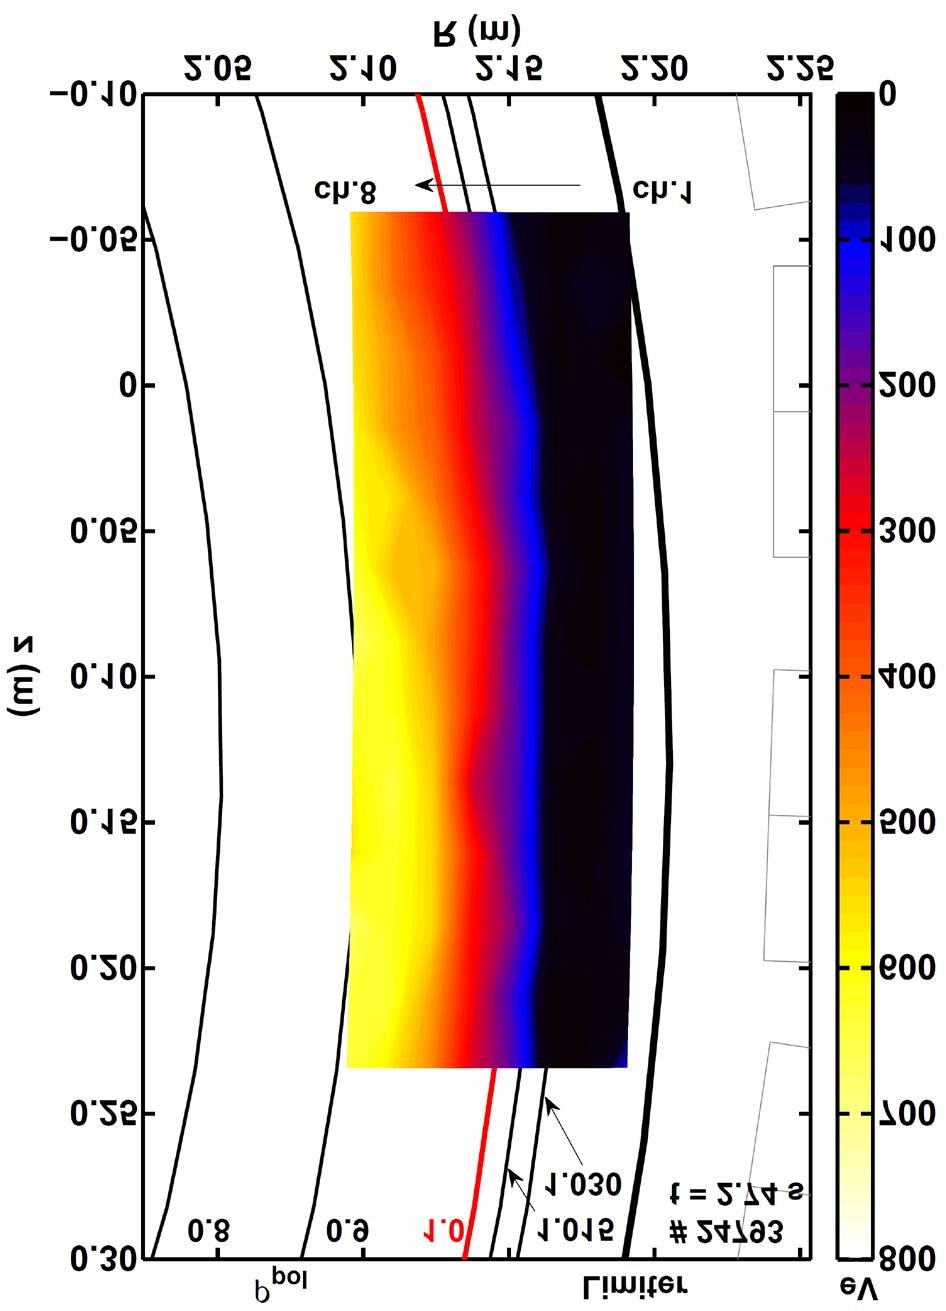 Figure 2. ECEI observation window for measurements at the LFS: the T e profile shown is obtained using the cross-calibration method described in paragraph 2.2. It is measured during the quiet phase in between two ELMs (discharge #24793 at 2.